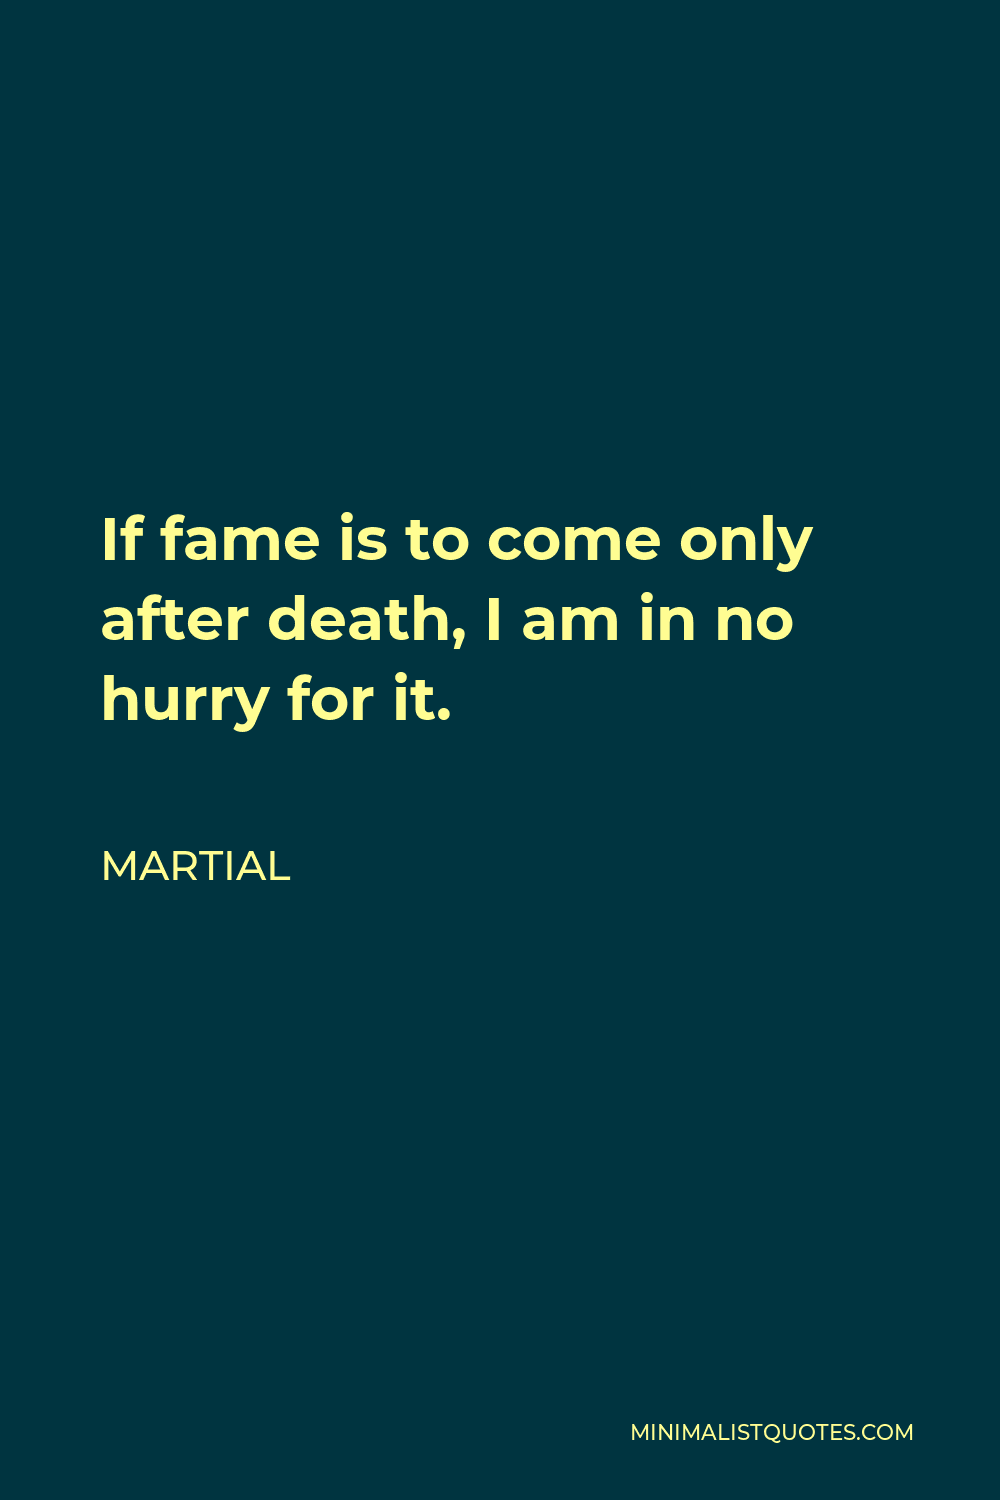 Martial Quote - If fame is to come only after death, I am in no hurry for it.